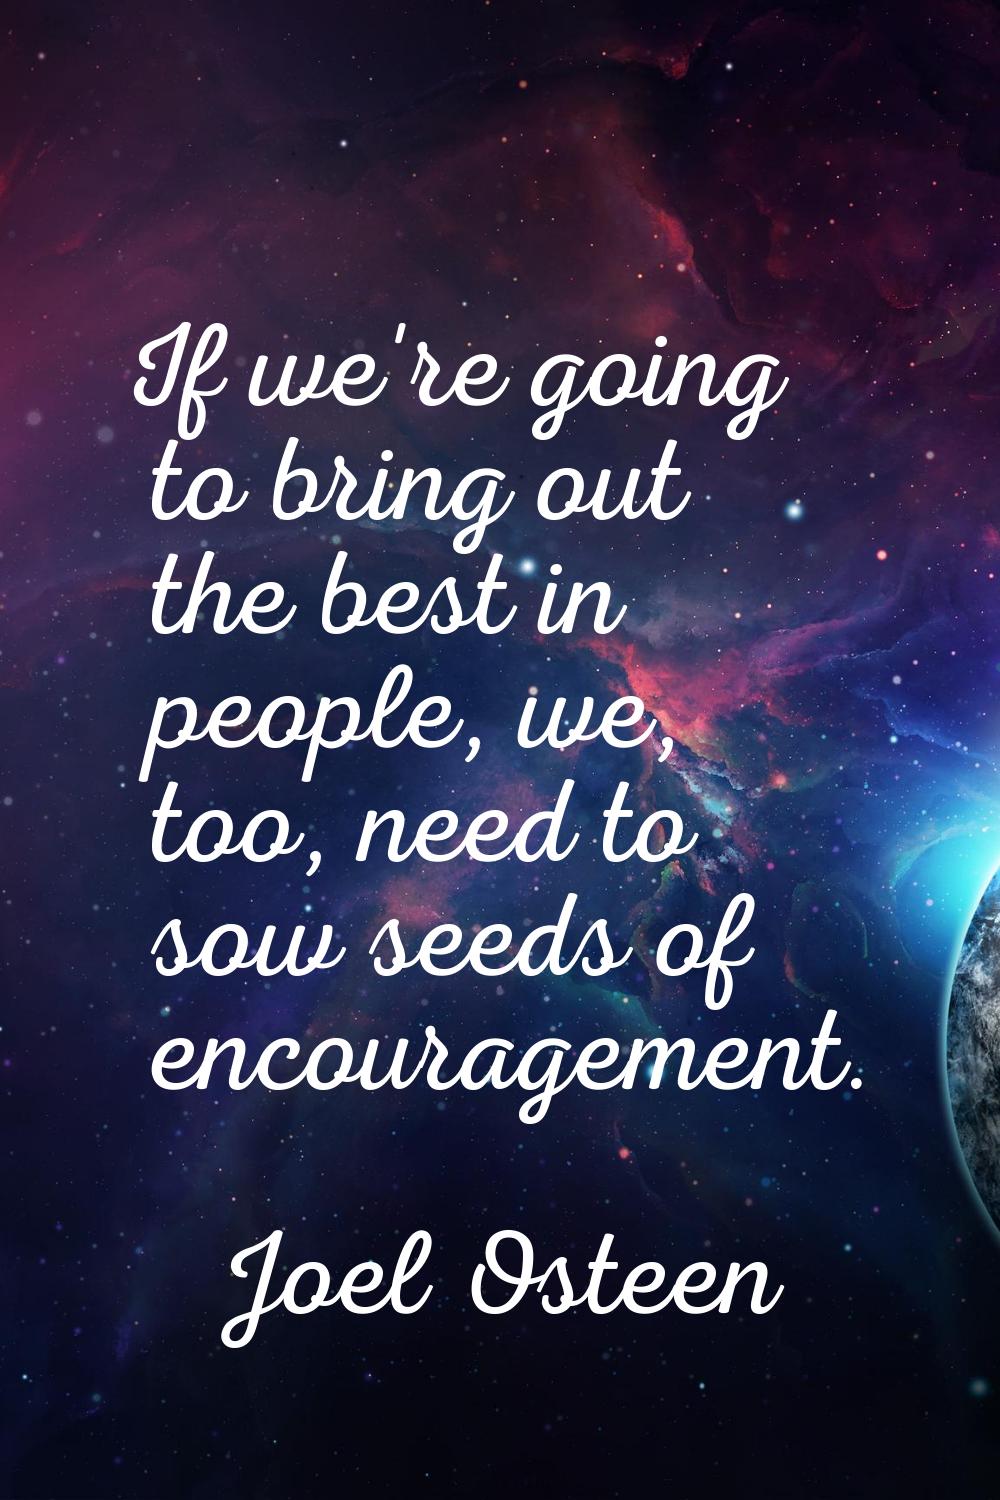 If we're going to bring out the best in people, we, too, need to sow seeds of encouragement.